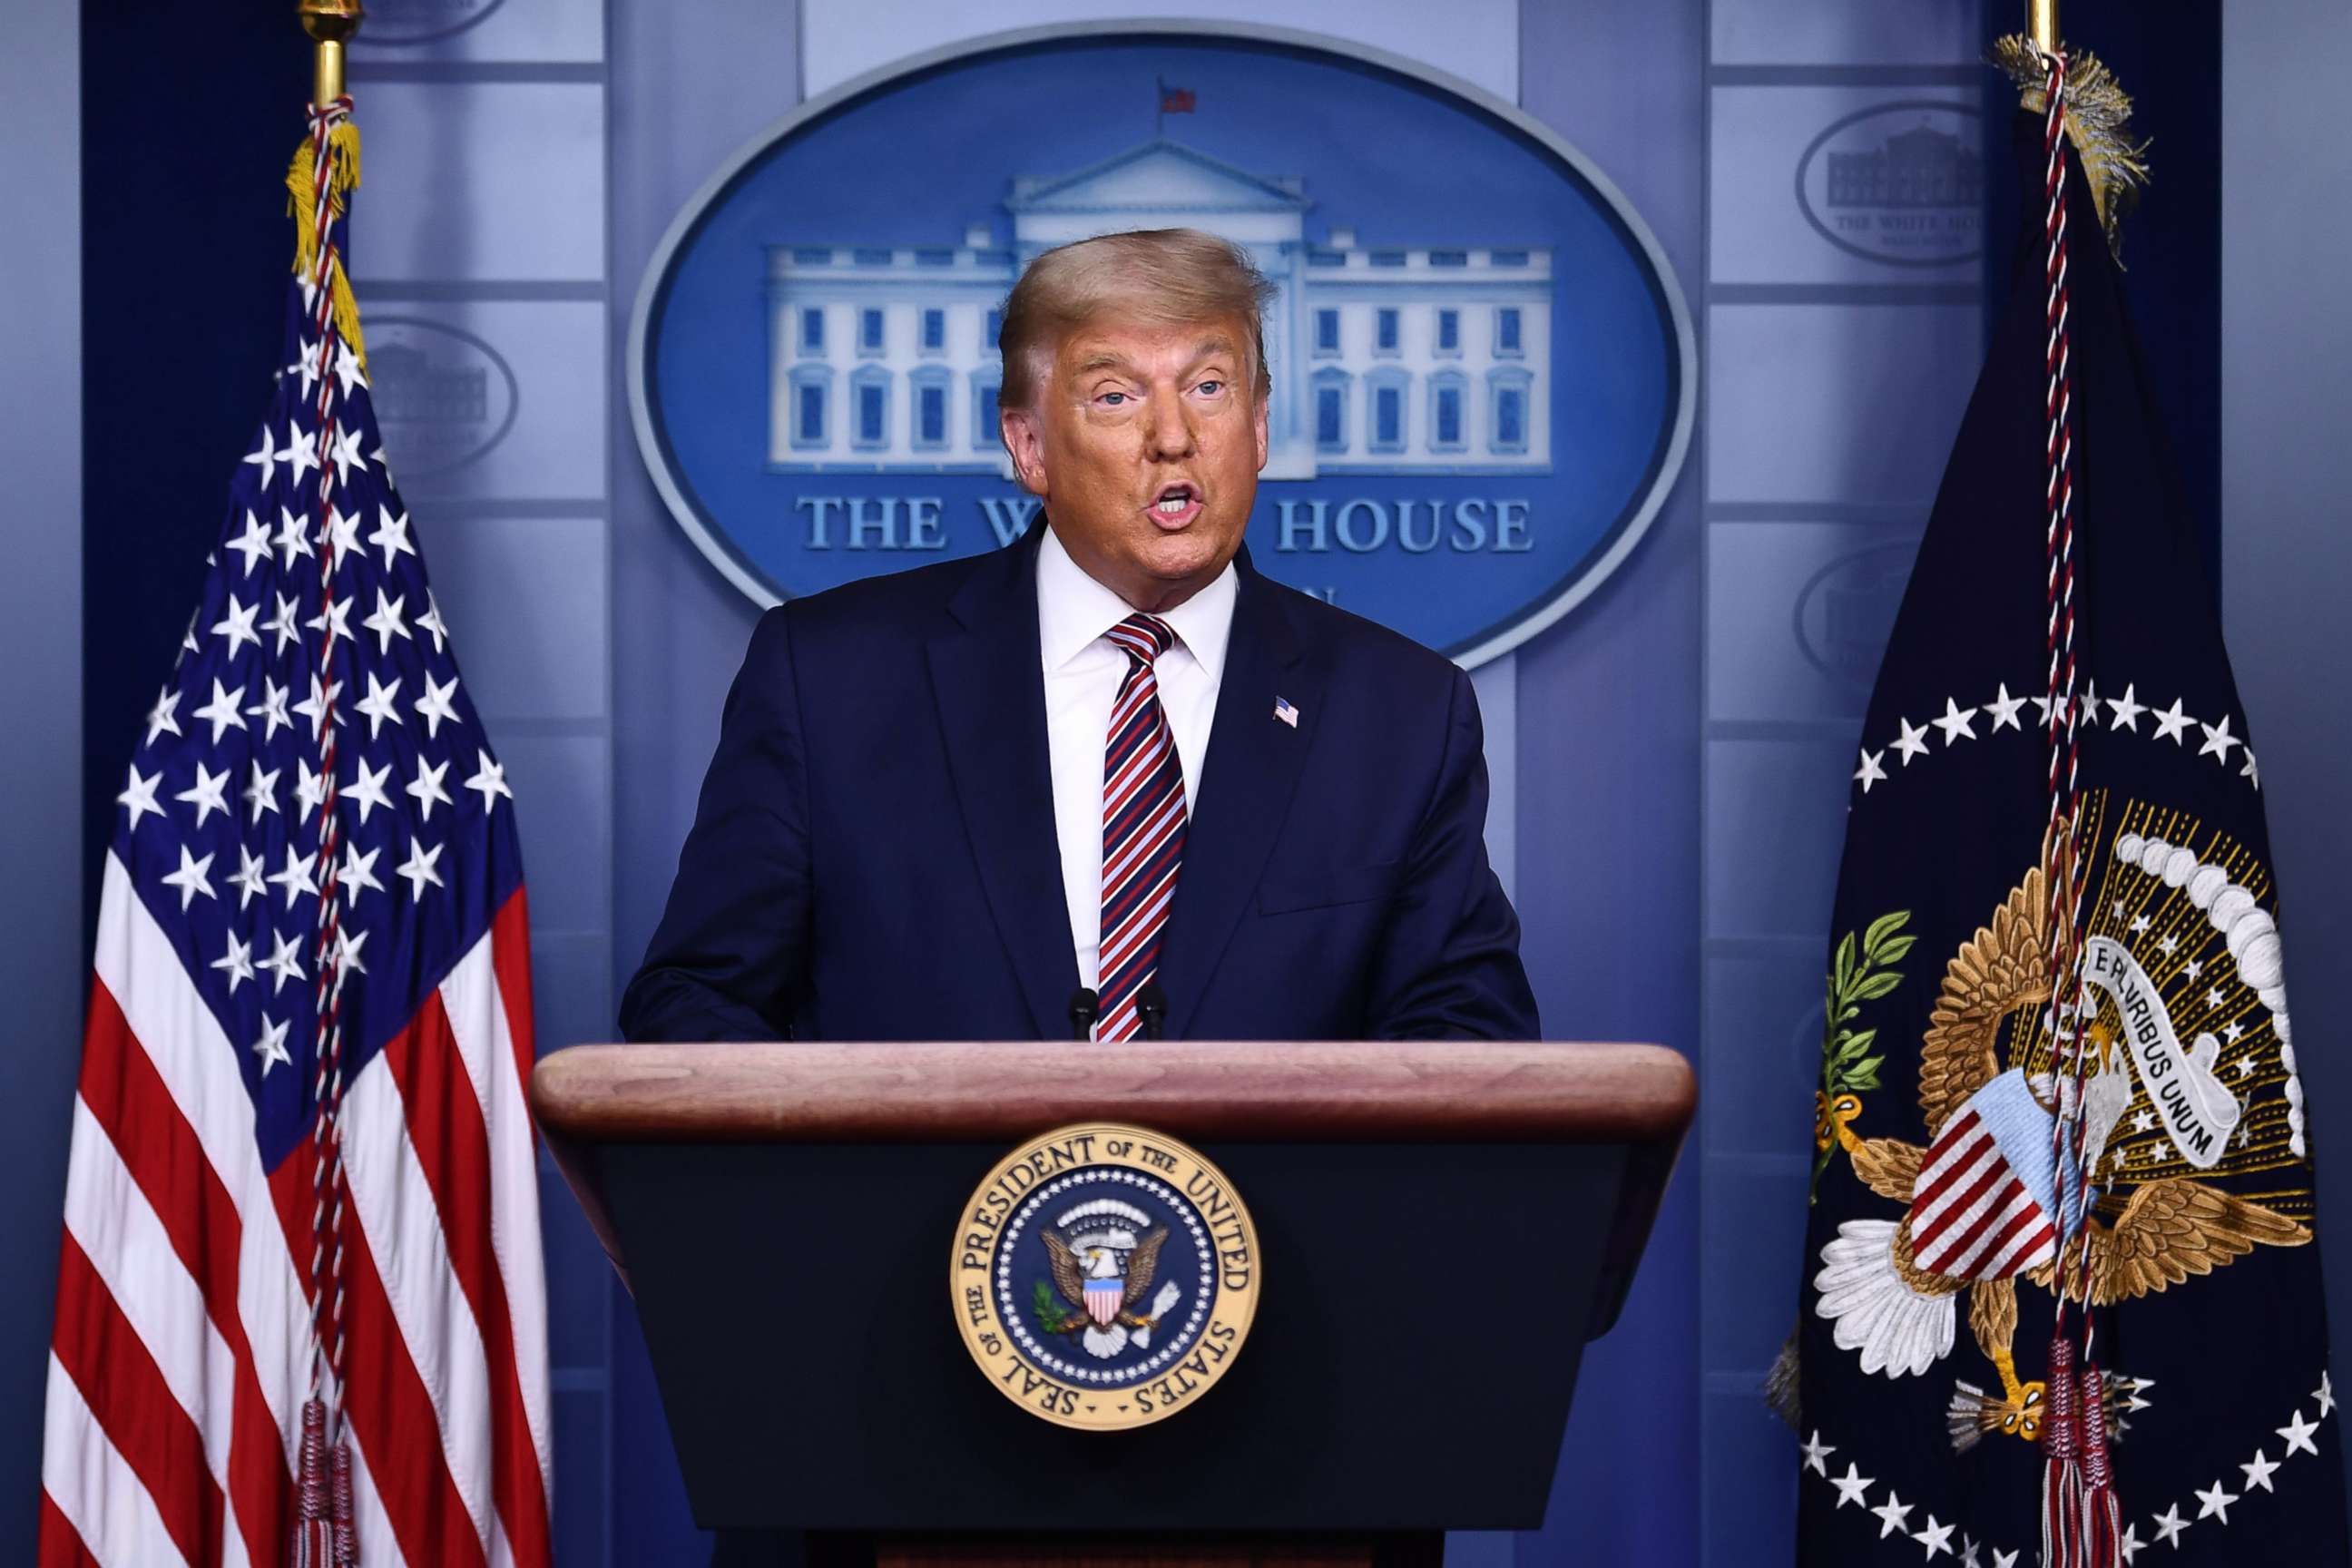 PHOTO: Donald Trump speaks in the Brady Briefing Room at the White House in Washington, DC, Nov. 5, 2020.